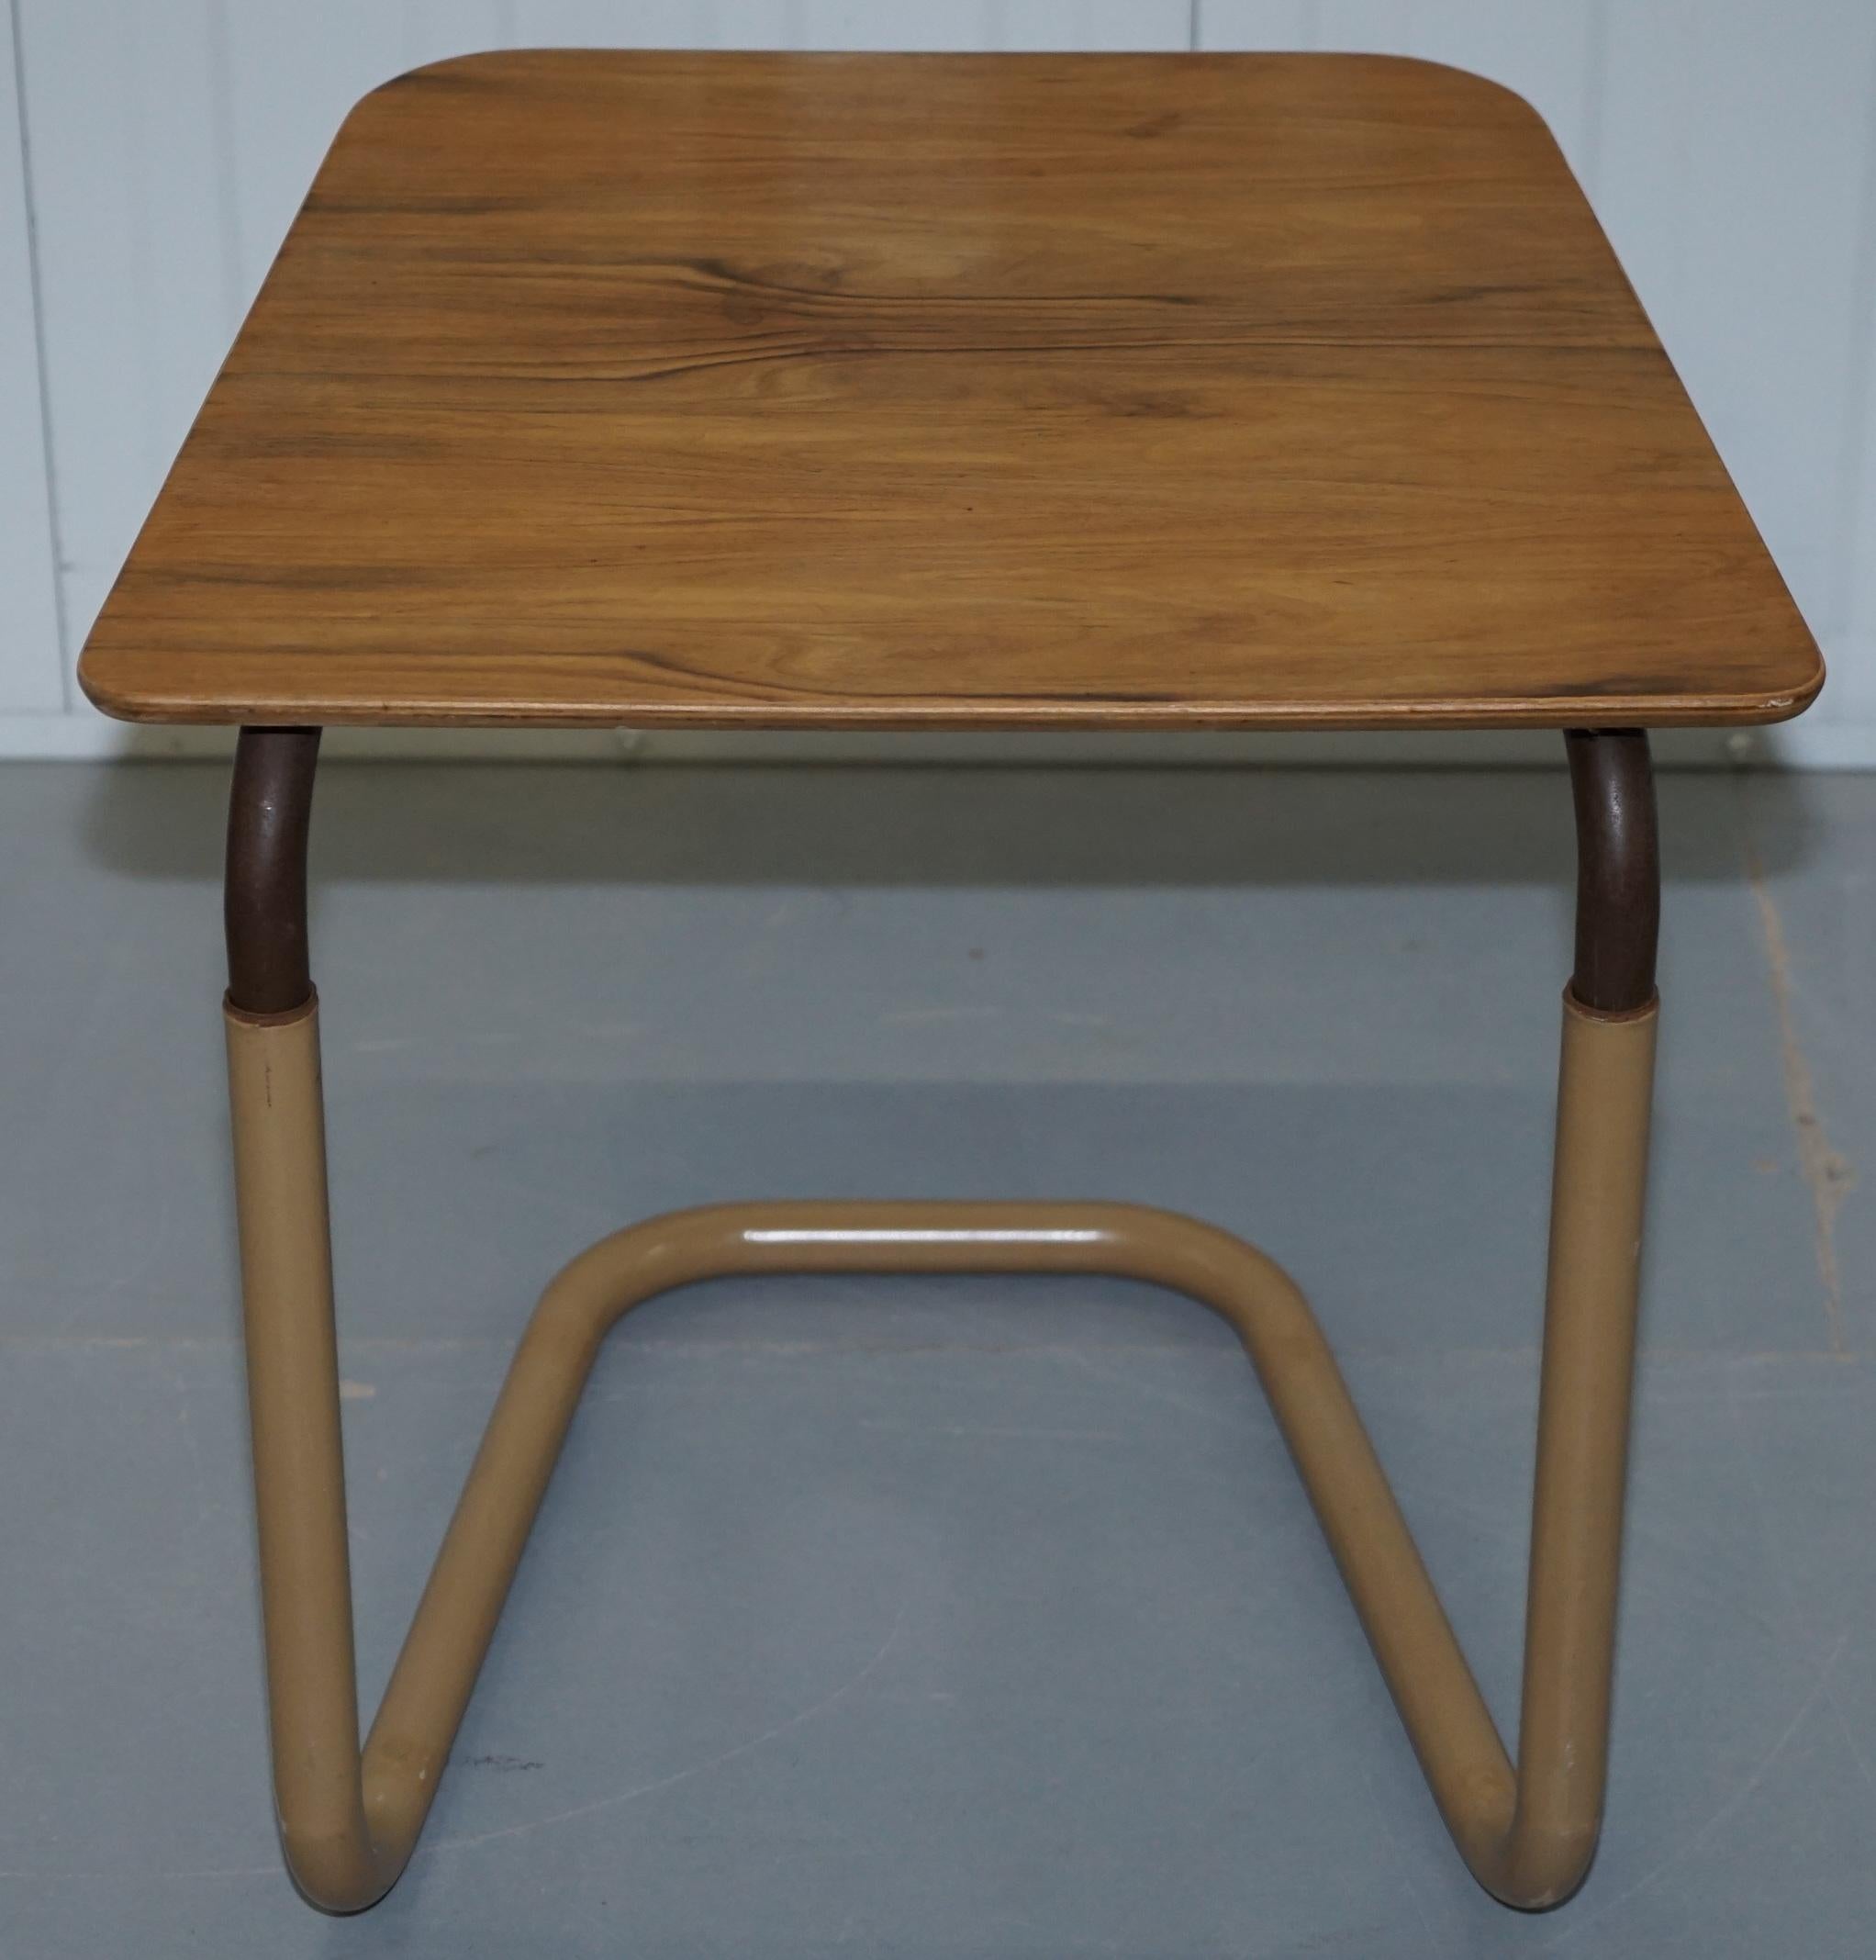 We are delighted to offer for sale this nice fully stamped height adjustable side table

As mentioned this is fully stamped as follows, “STAPLES CANTILEVER TABLE PATENT NO 758113, manufacturers of bedsteads and bedding to H.M. The Queen. Wire